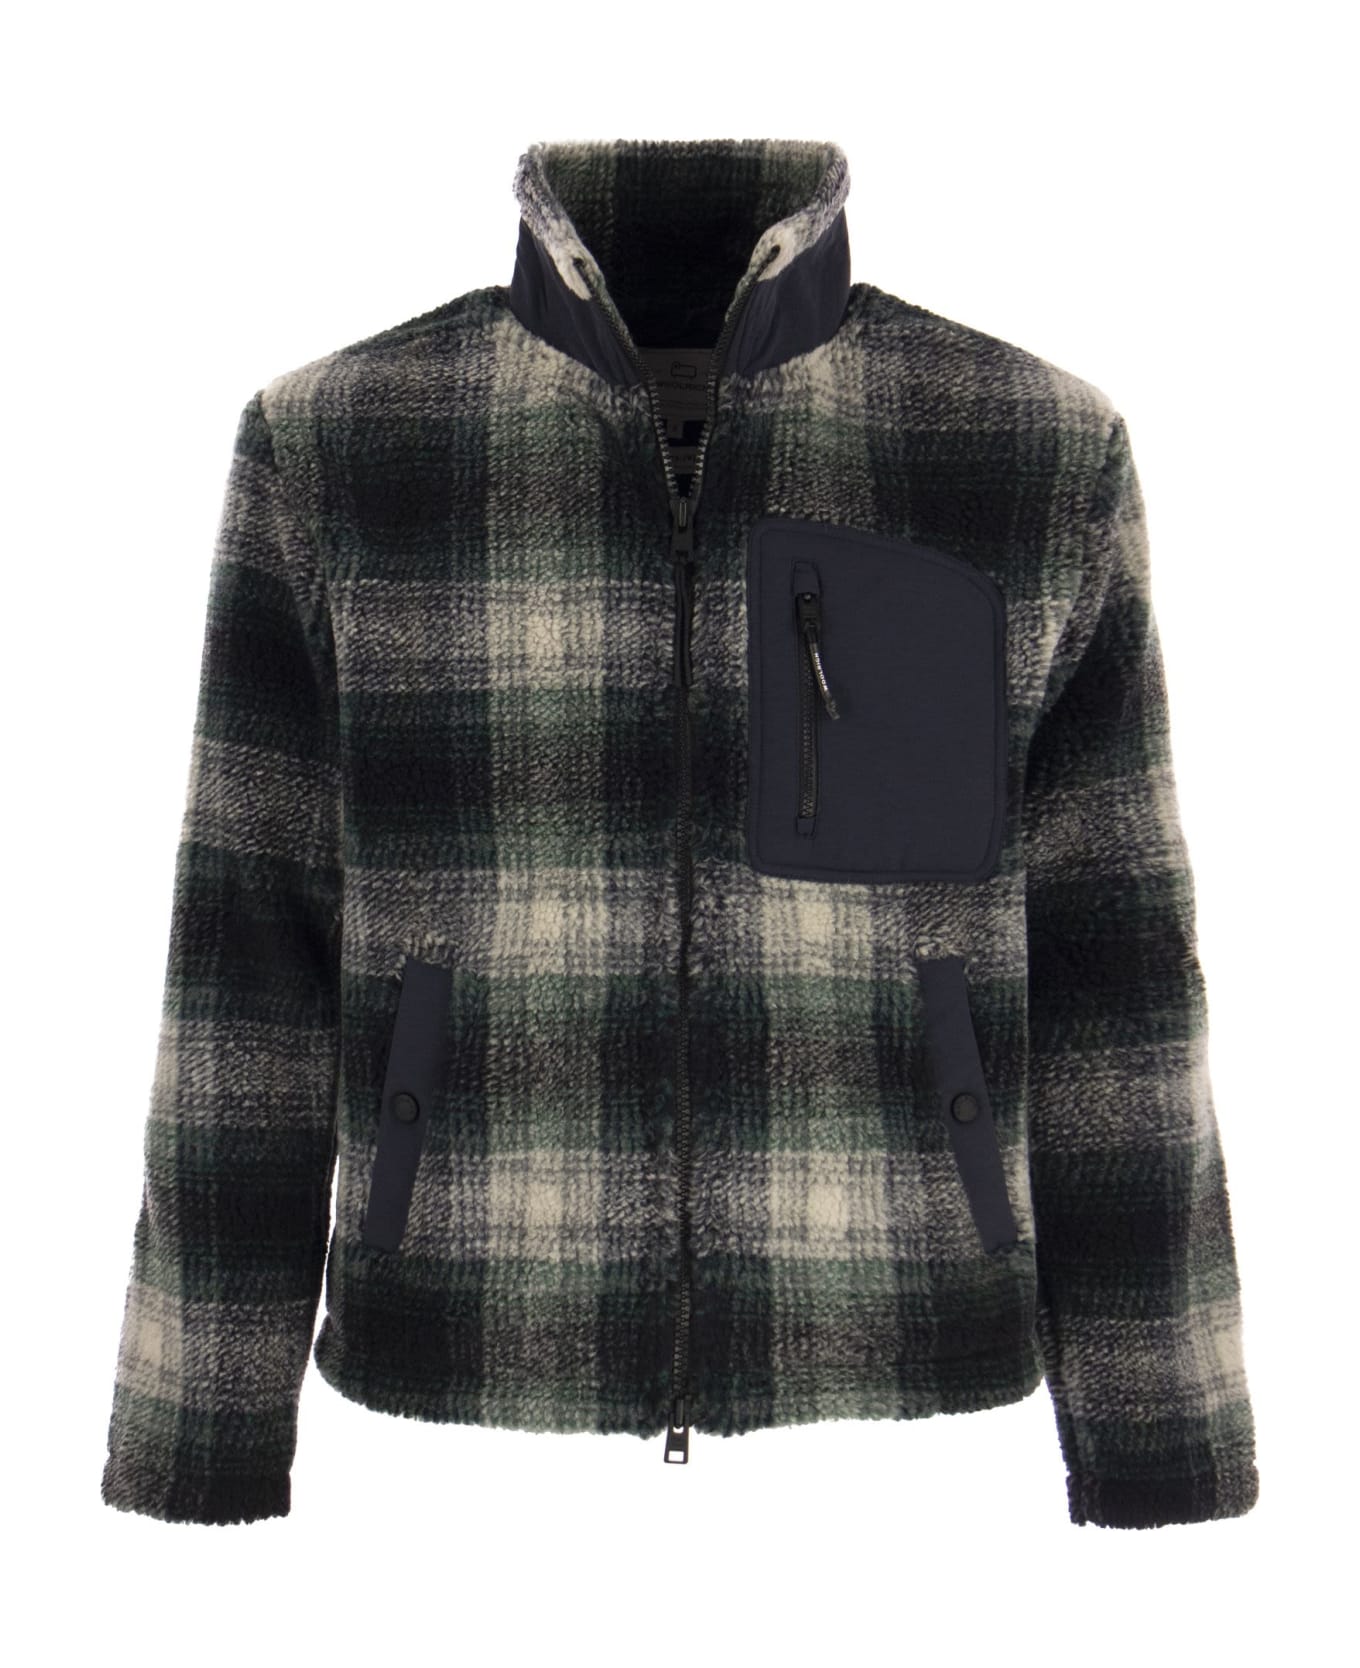 Woolrich Giacca Sherpa Zip-up Hombre Grey - Grey/green ジャケット